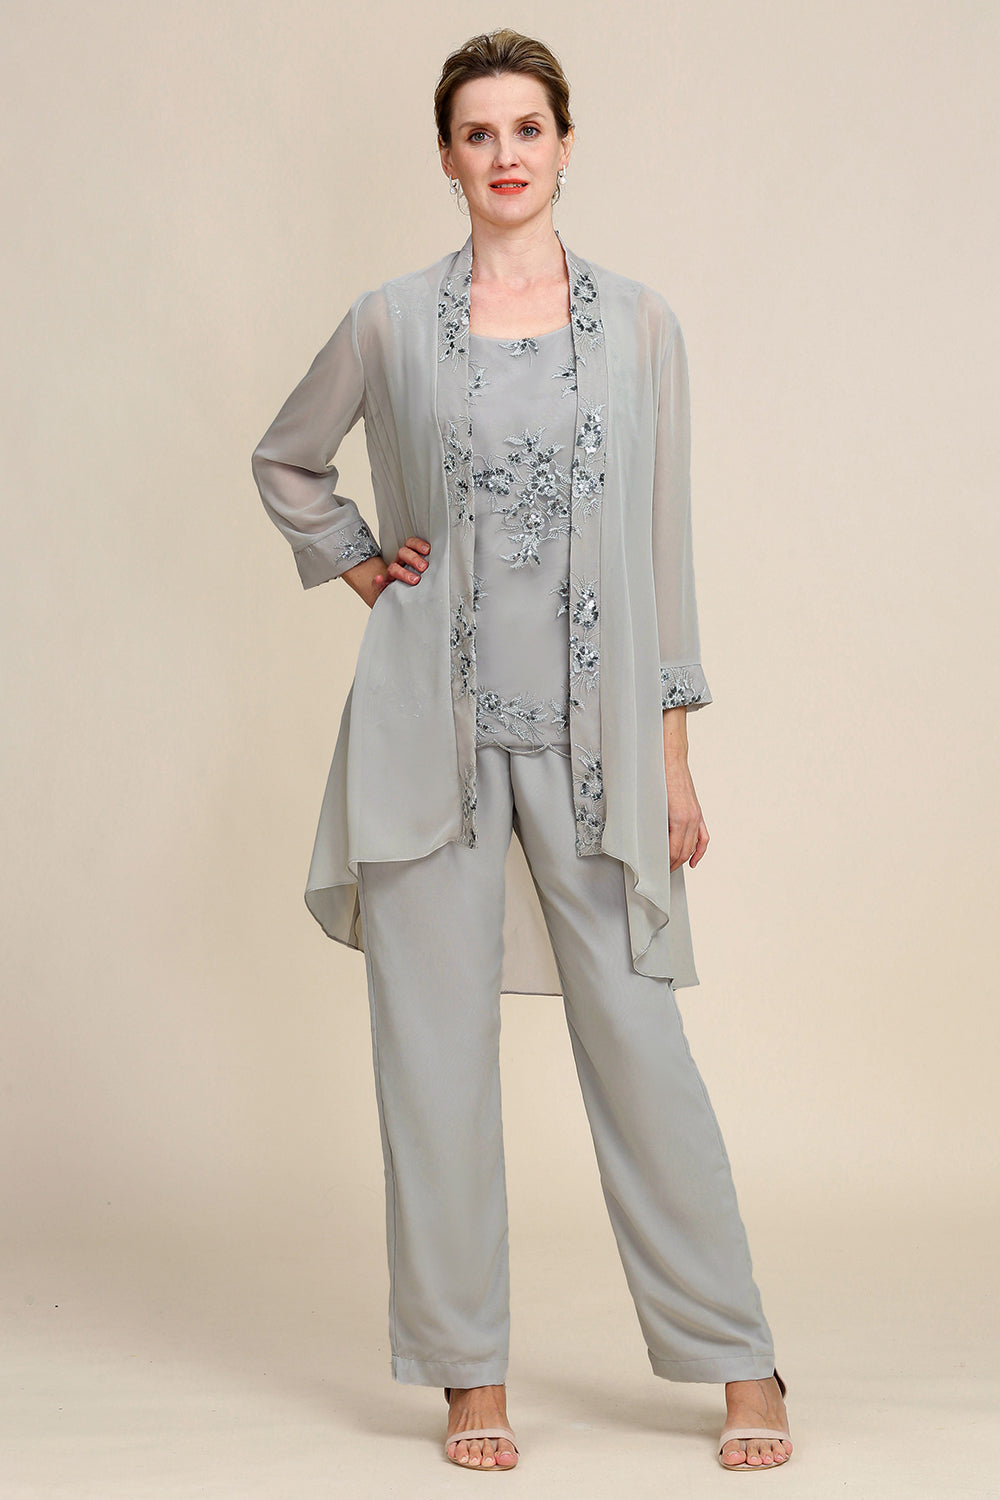 Zapaka Women Grey 3 Piece Mother of the Bride Pant Suits with Lace Chiffon  Formal Outfit Set – ZAPAKA